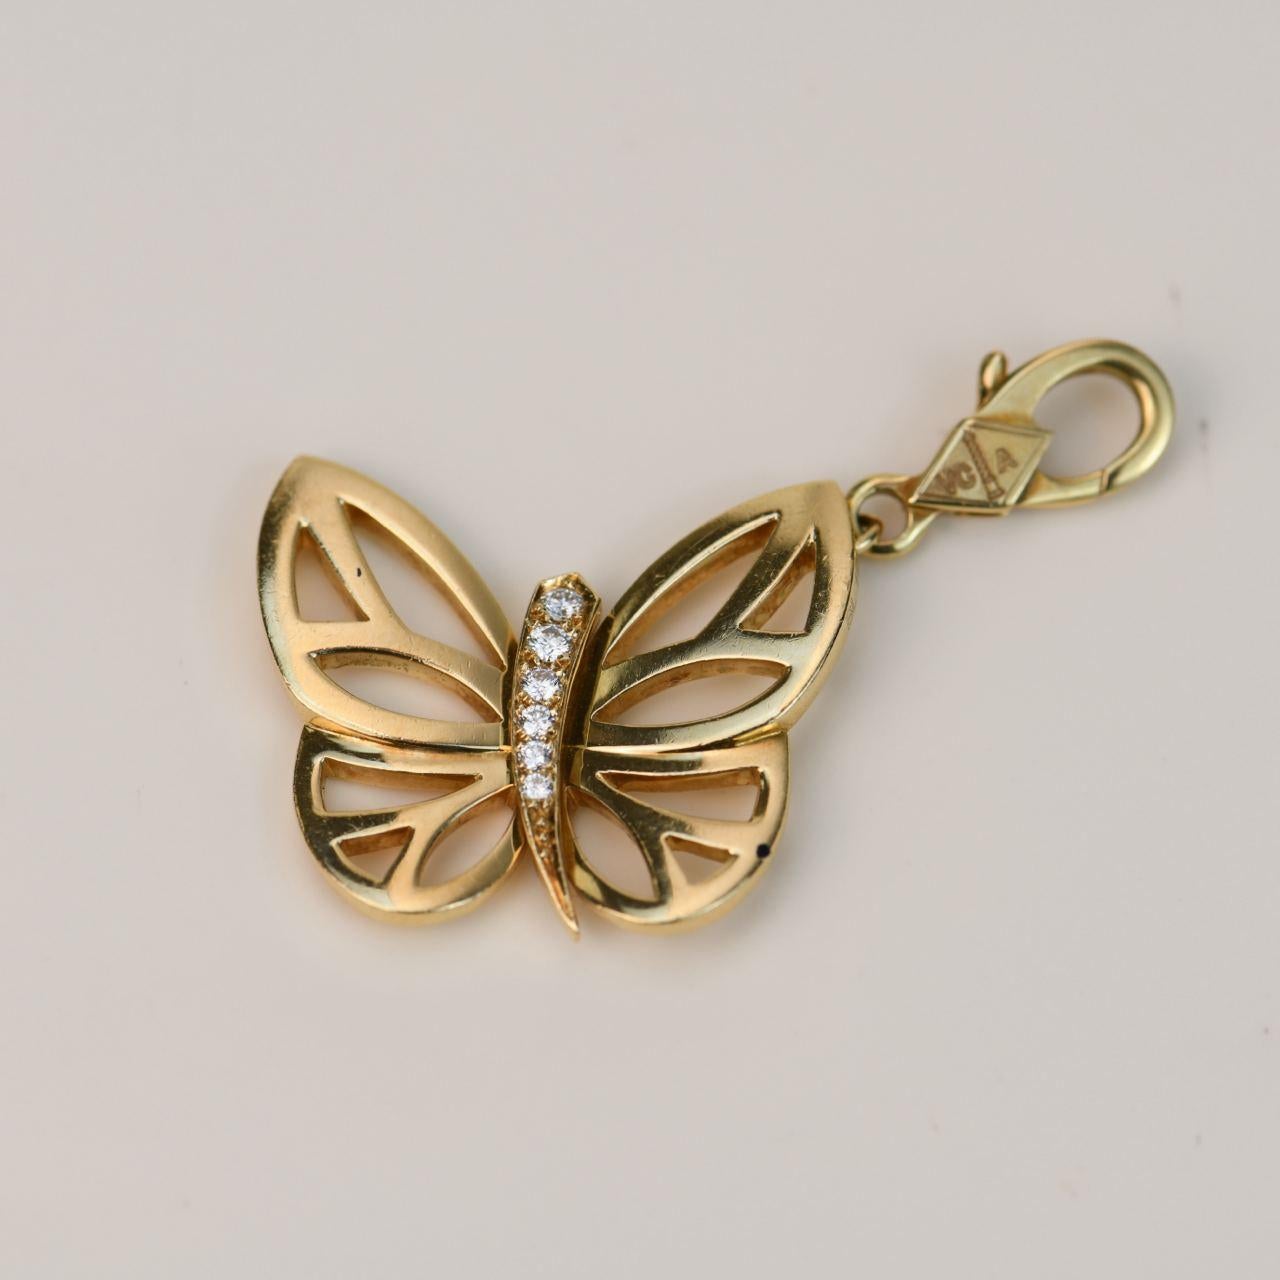 Brilliant Cut Van Cleef & Arpels Diamond and 18k Yellow Gold Butterfly Pendant For Sale